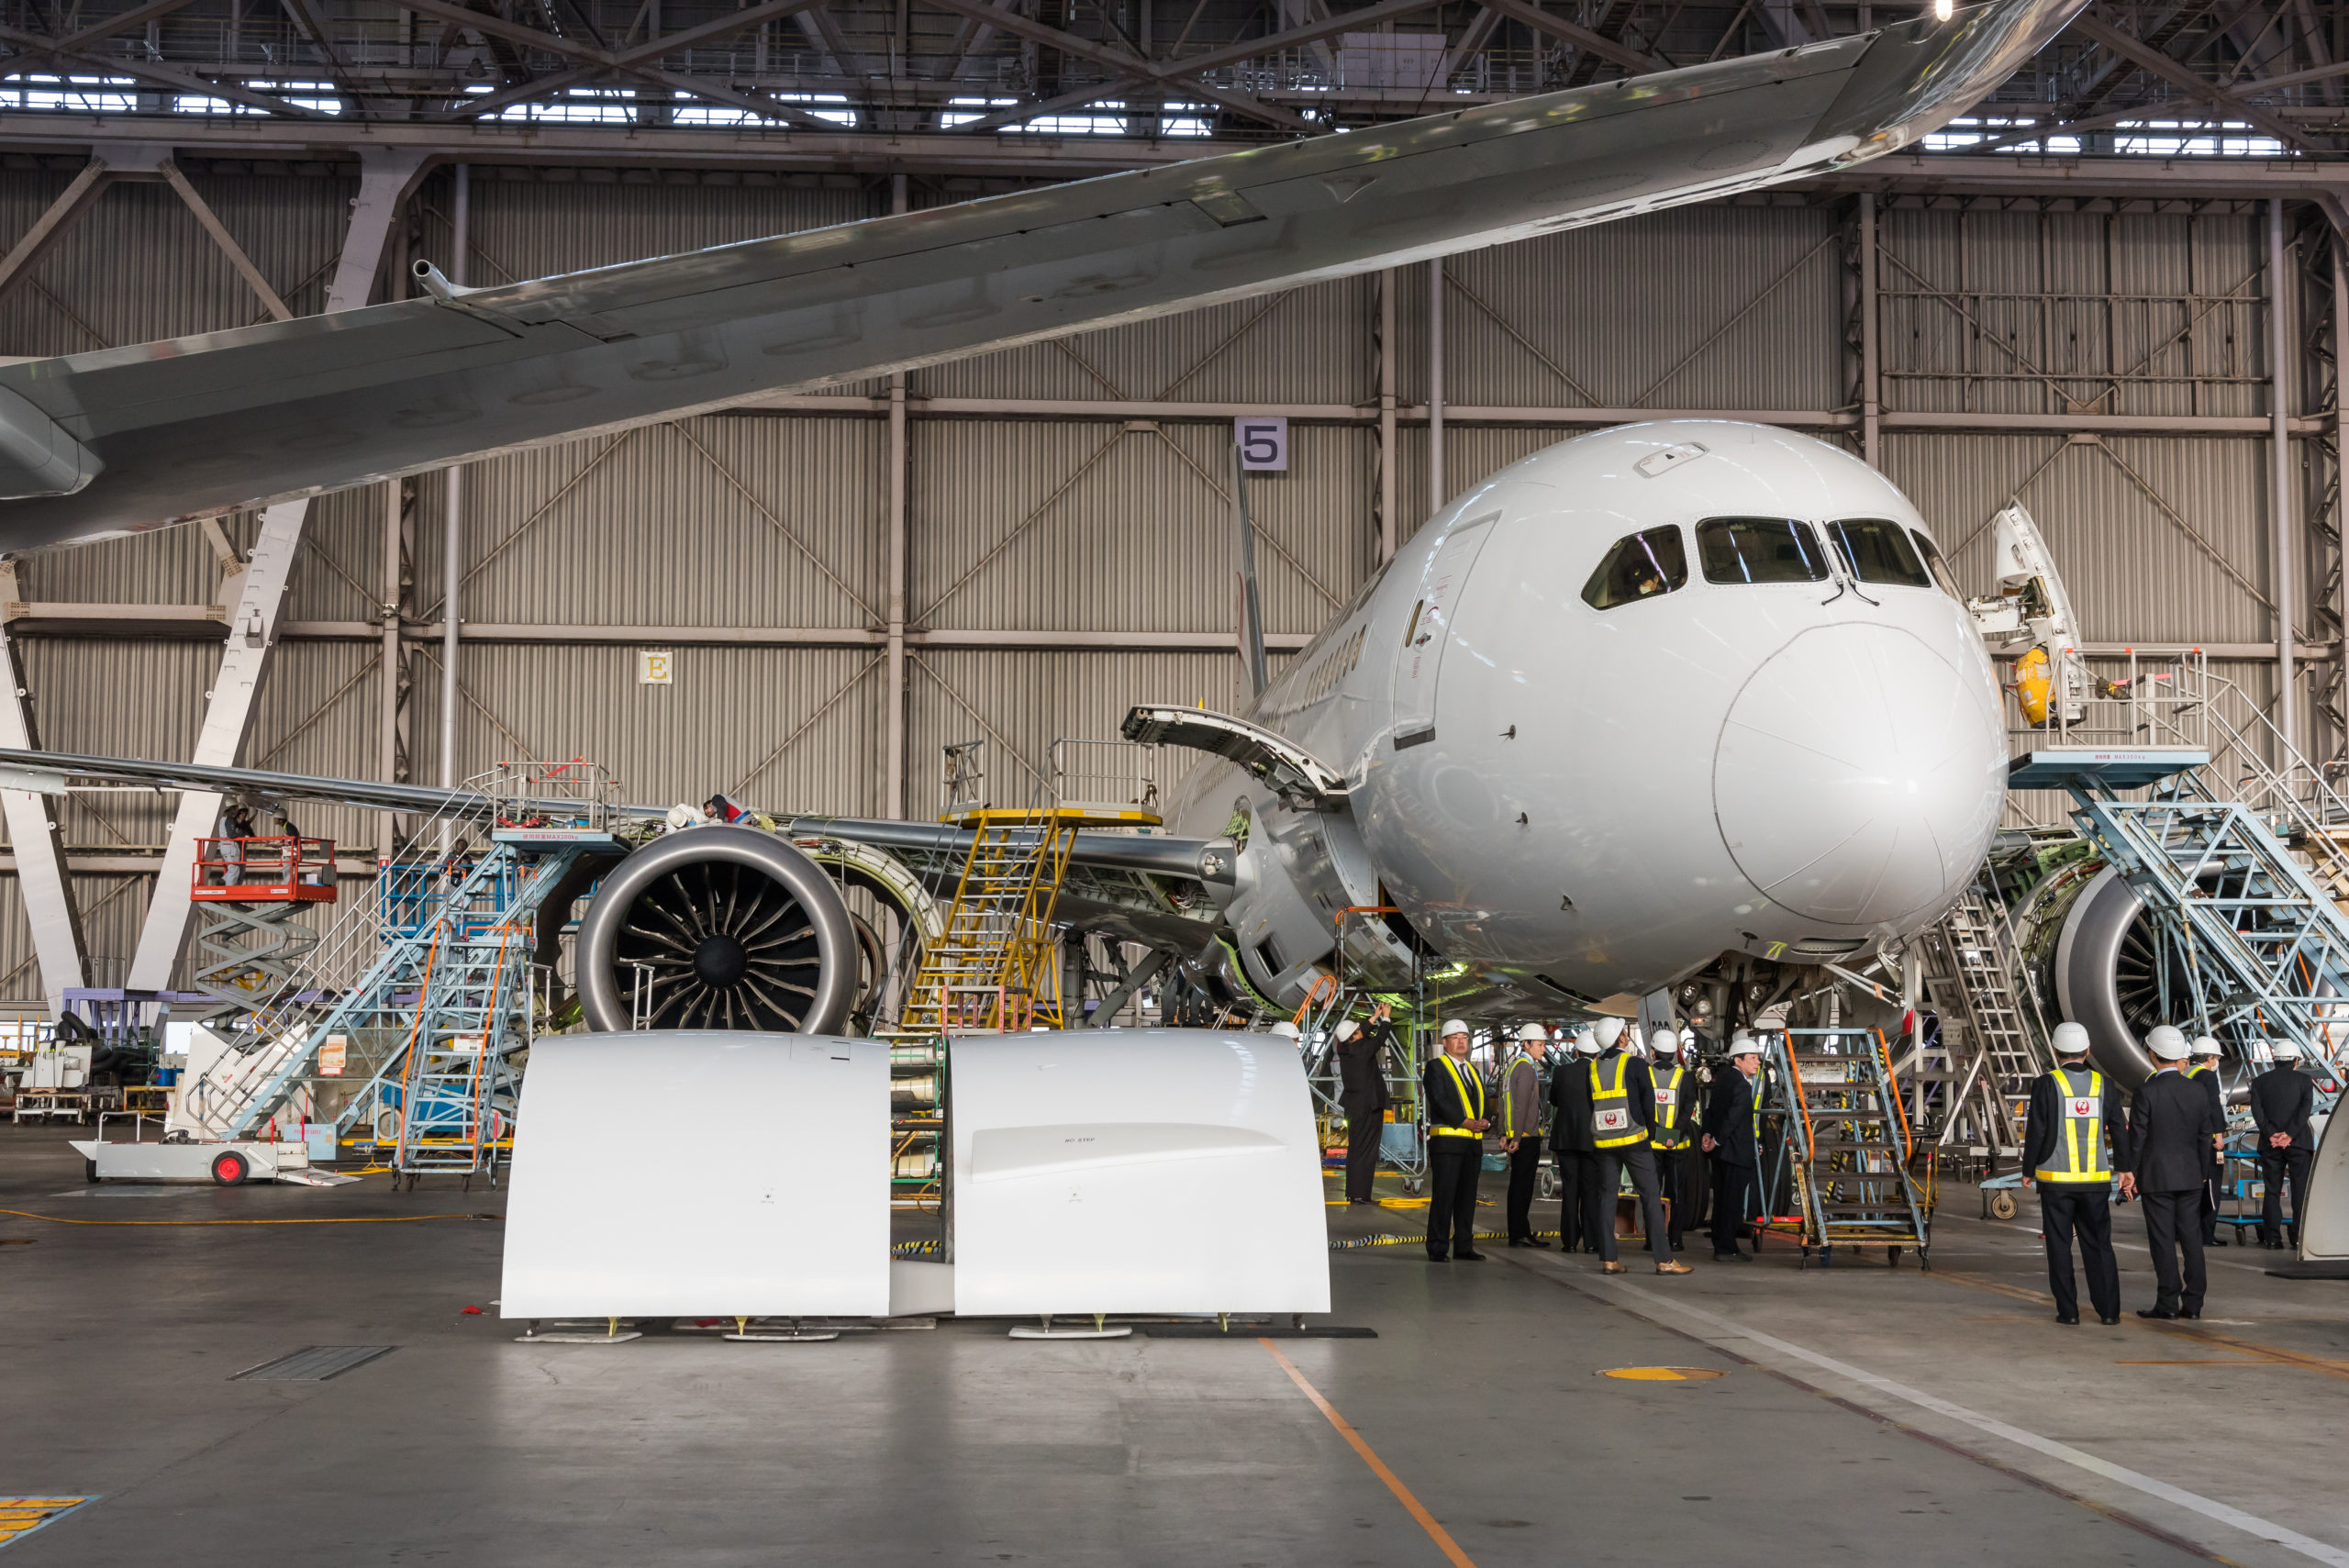 Workers gather around a plane in an airframe manufacturing plant